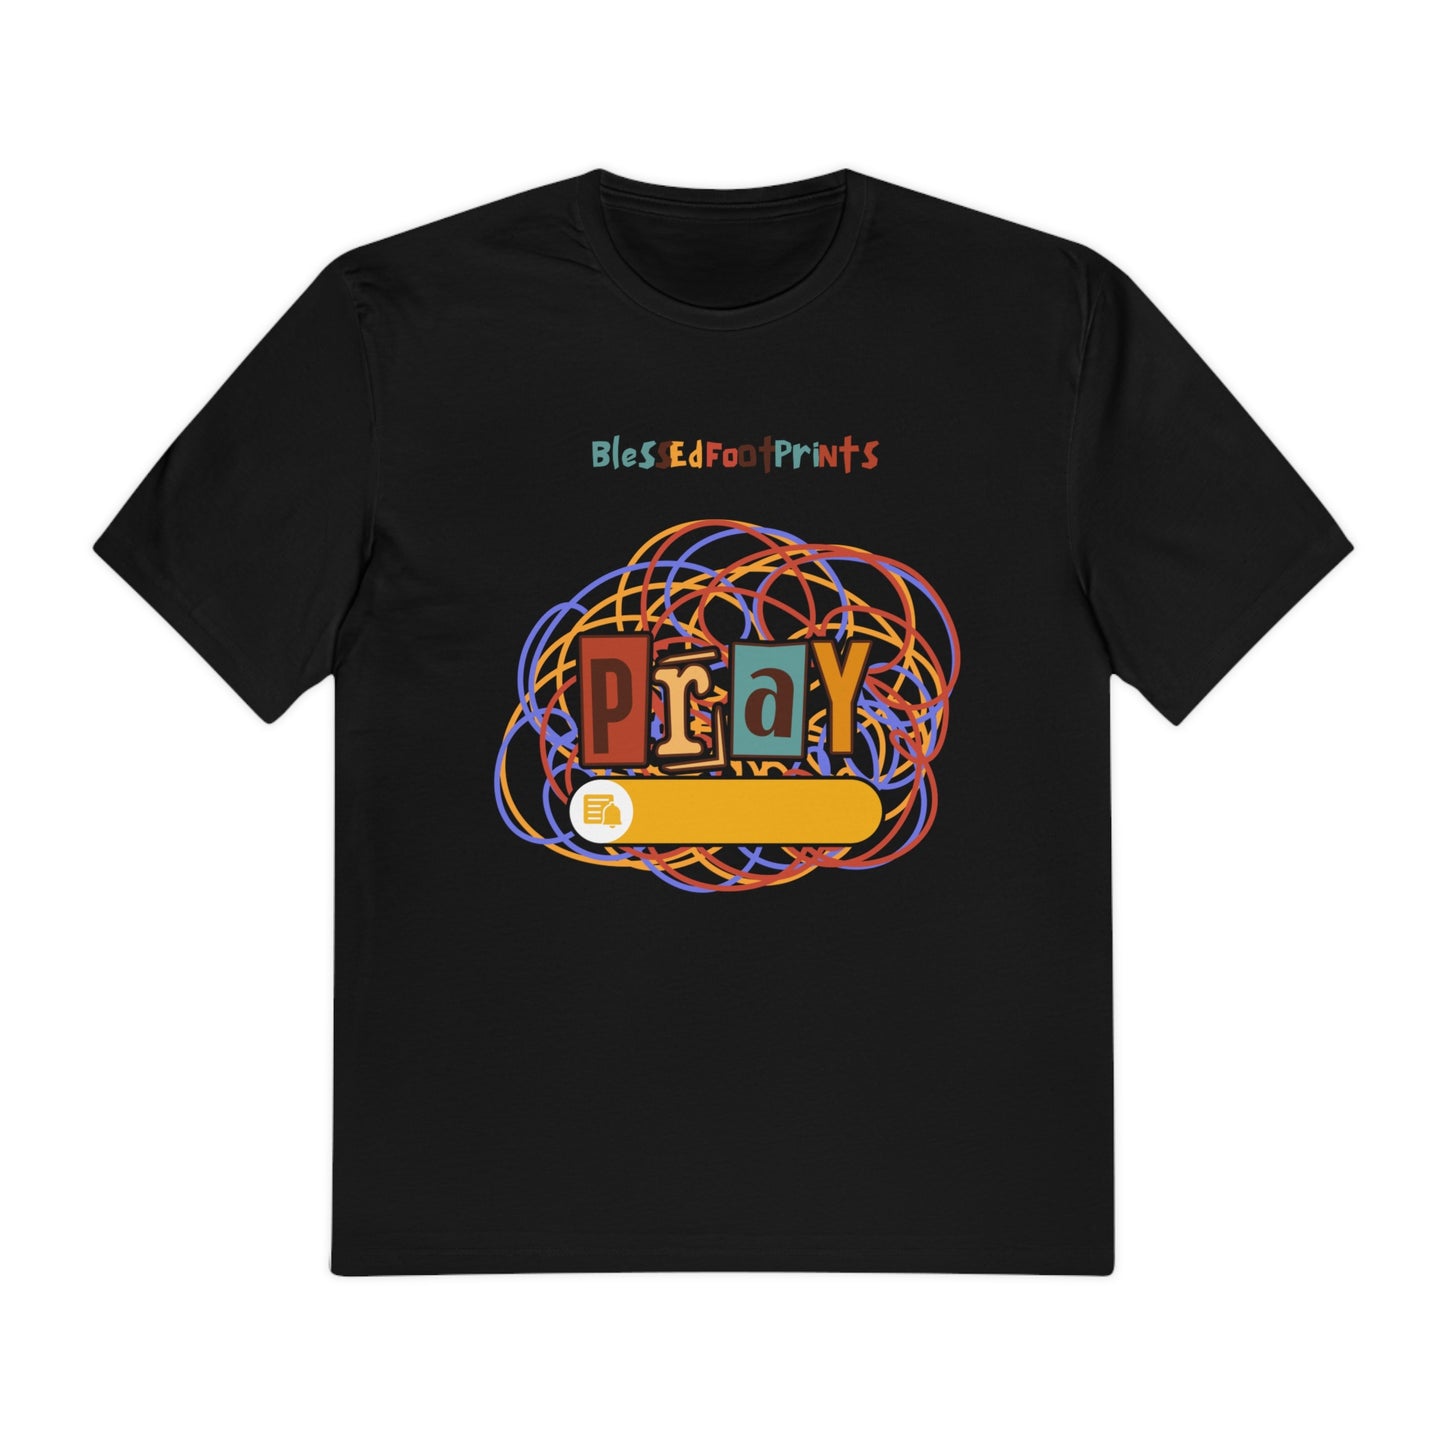 Vibrant "Pray" Tee with Captivating Abstract Background